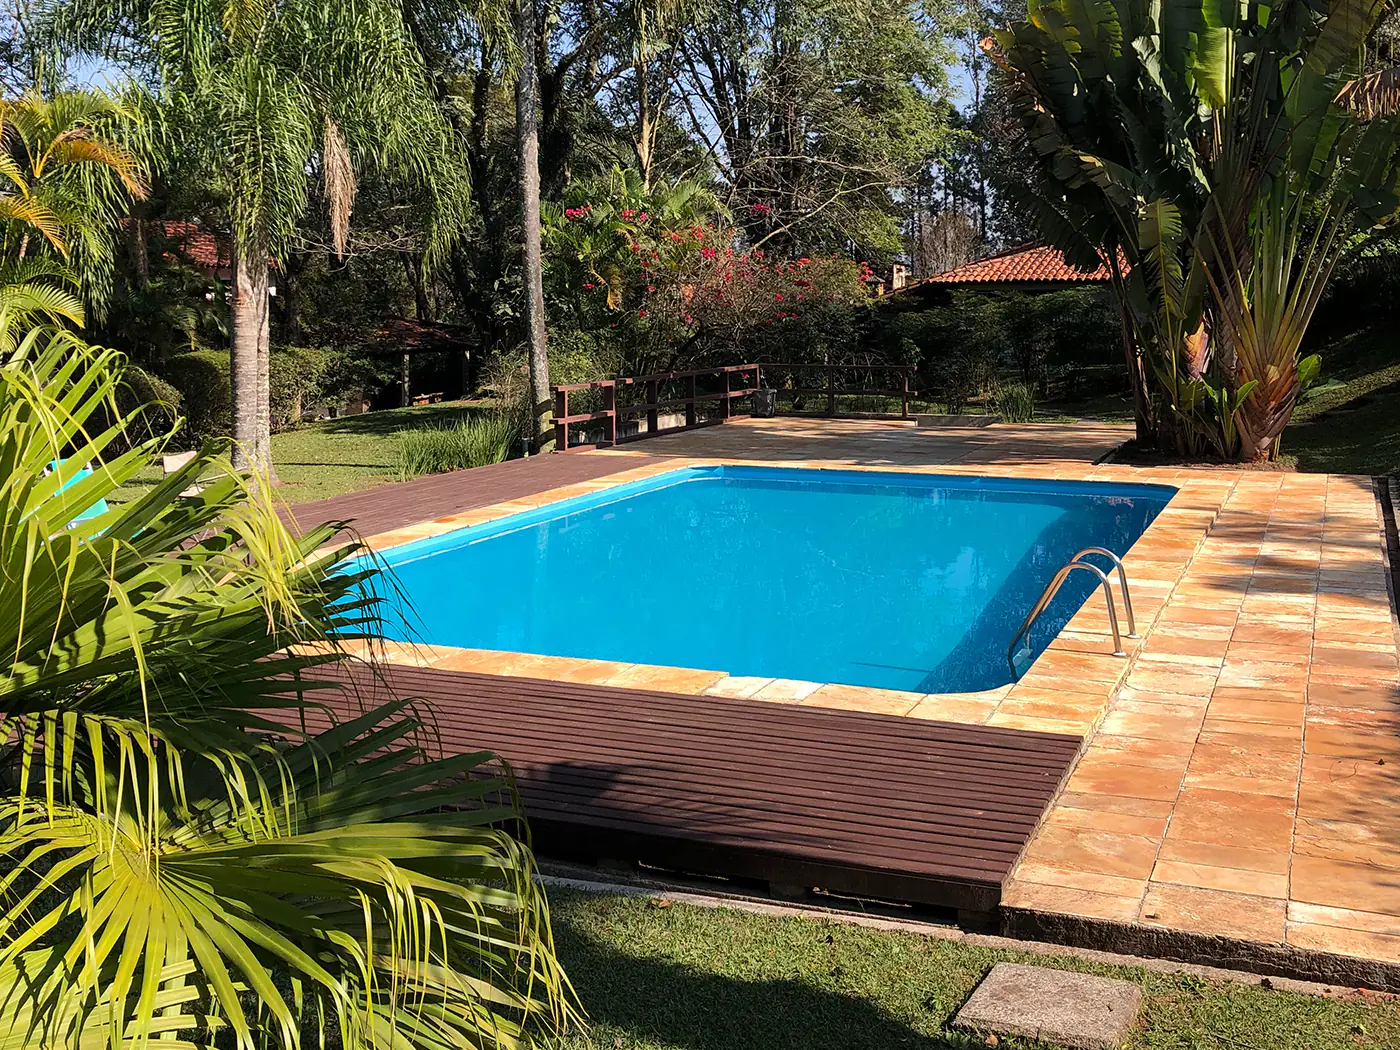 Image of an in-ground swimming pool in a garden.